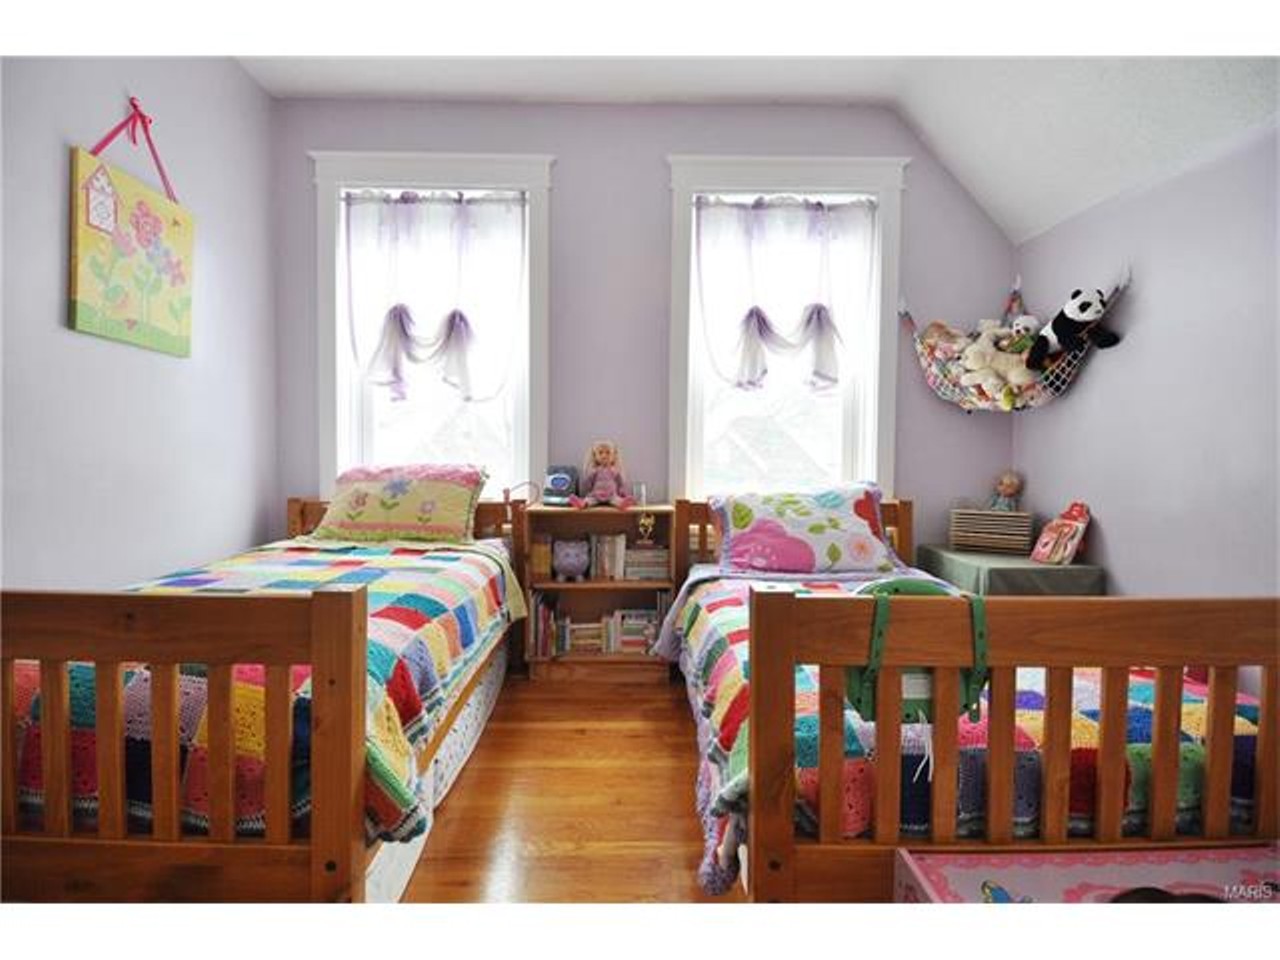 Isn&#146;t this room too cute?